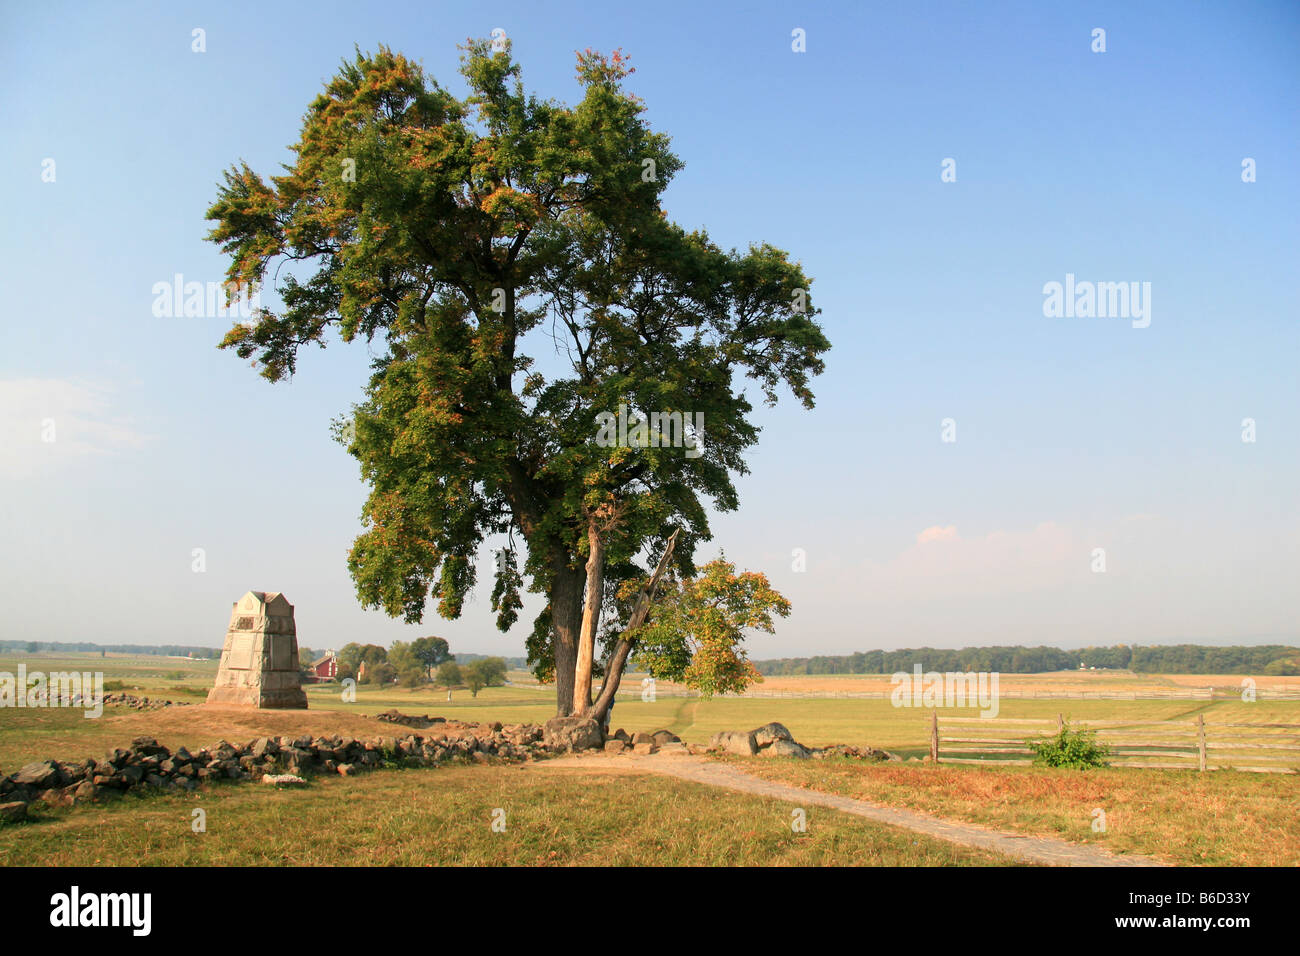 The tree shown marks The Angle which sits on the High Water Mark, Cemetery Ridge, Gettysburg National Military Park. Stock Photo